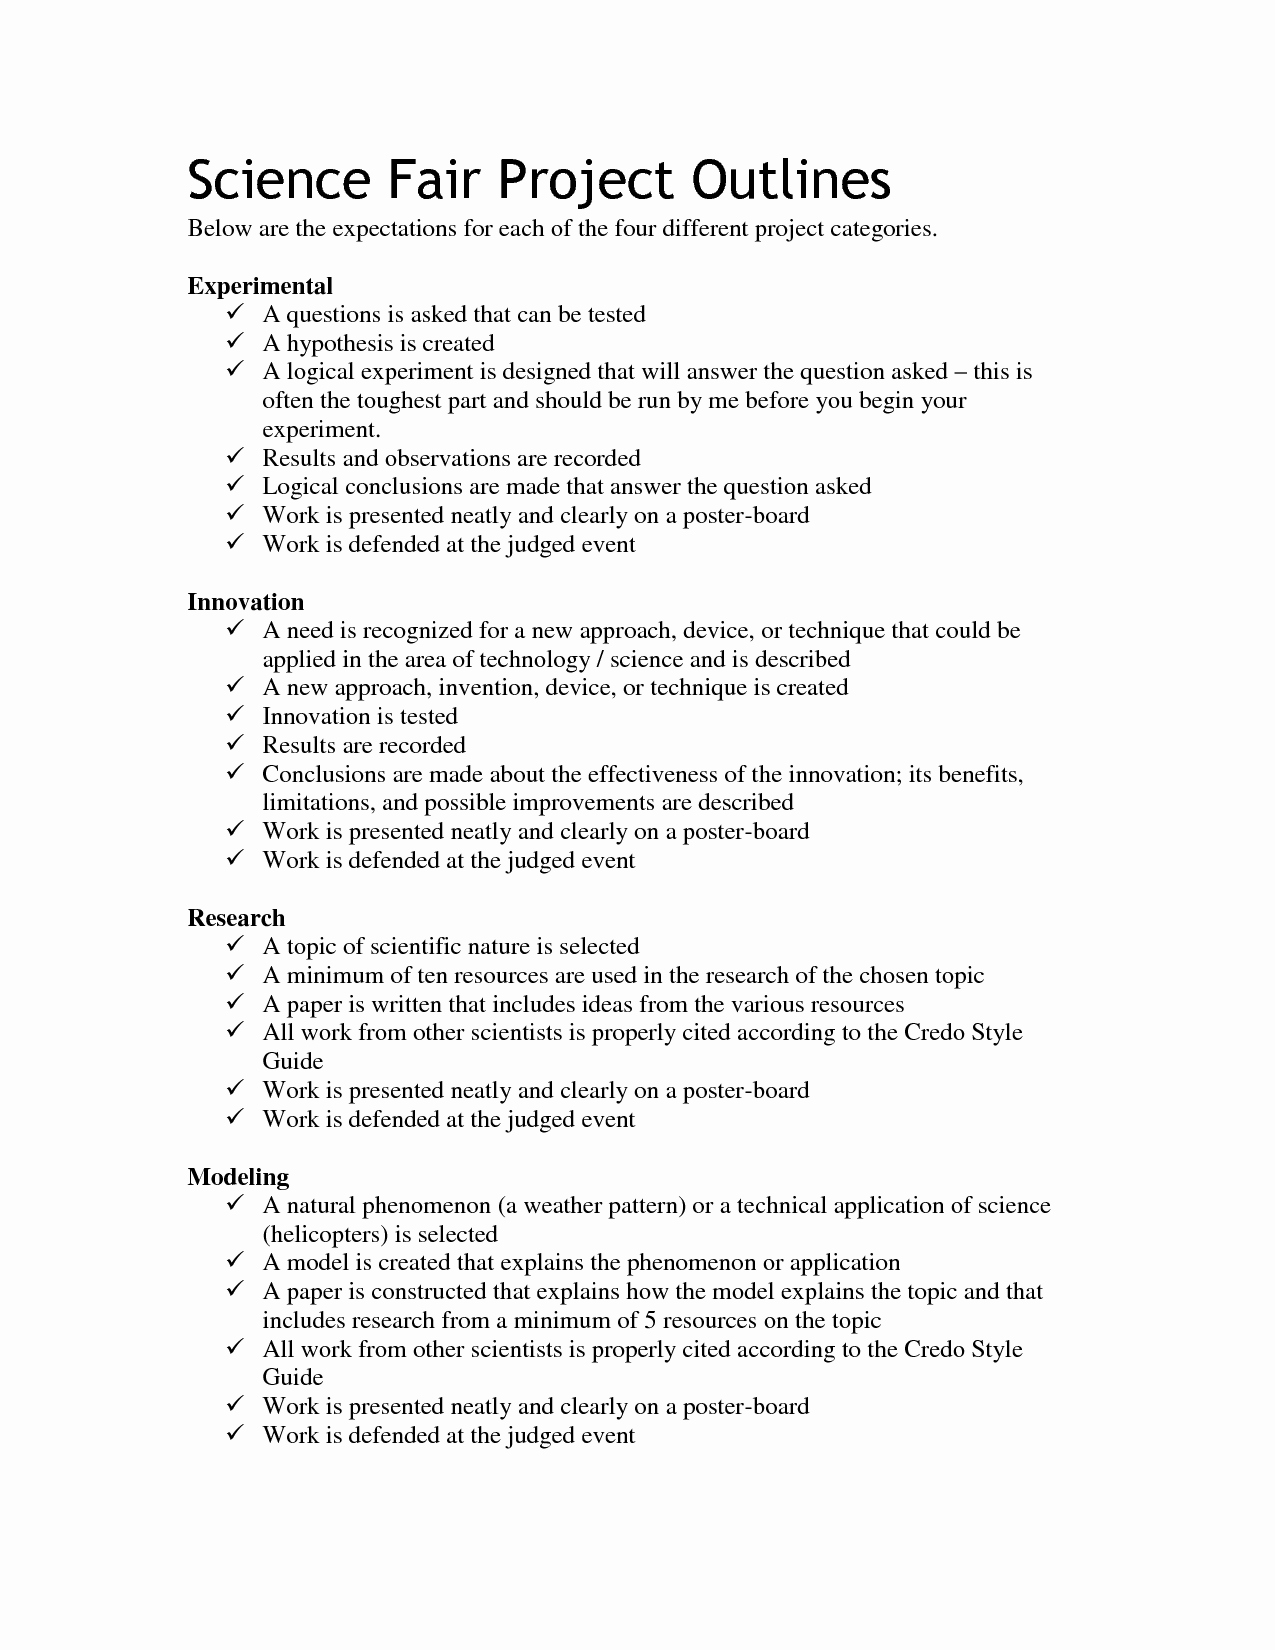 Project Outline Template Word Fresh 100 Science Fair Project Template Word Here is Preview